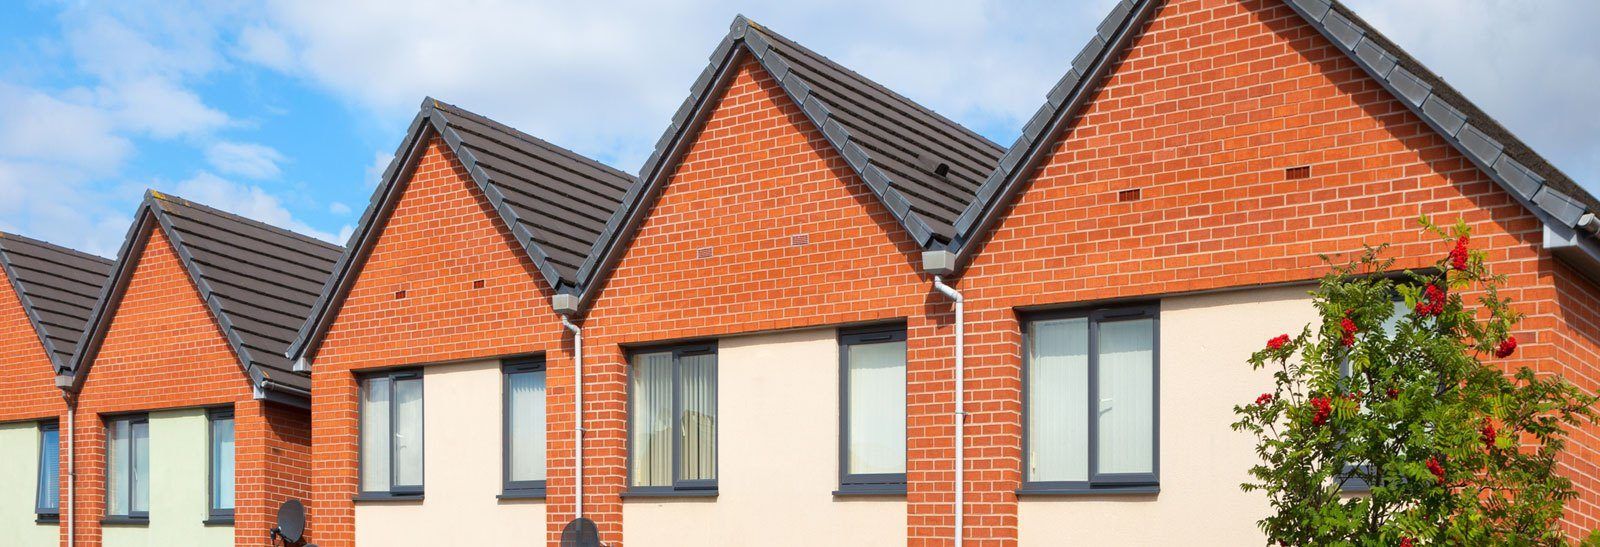 South West affordable housing supply to be debated in Parliament